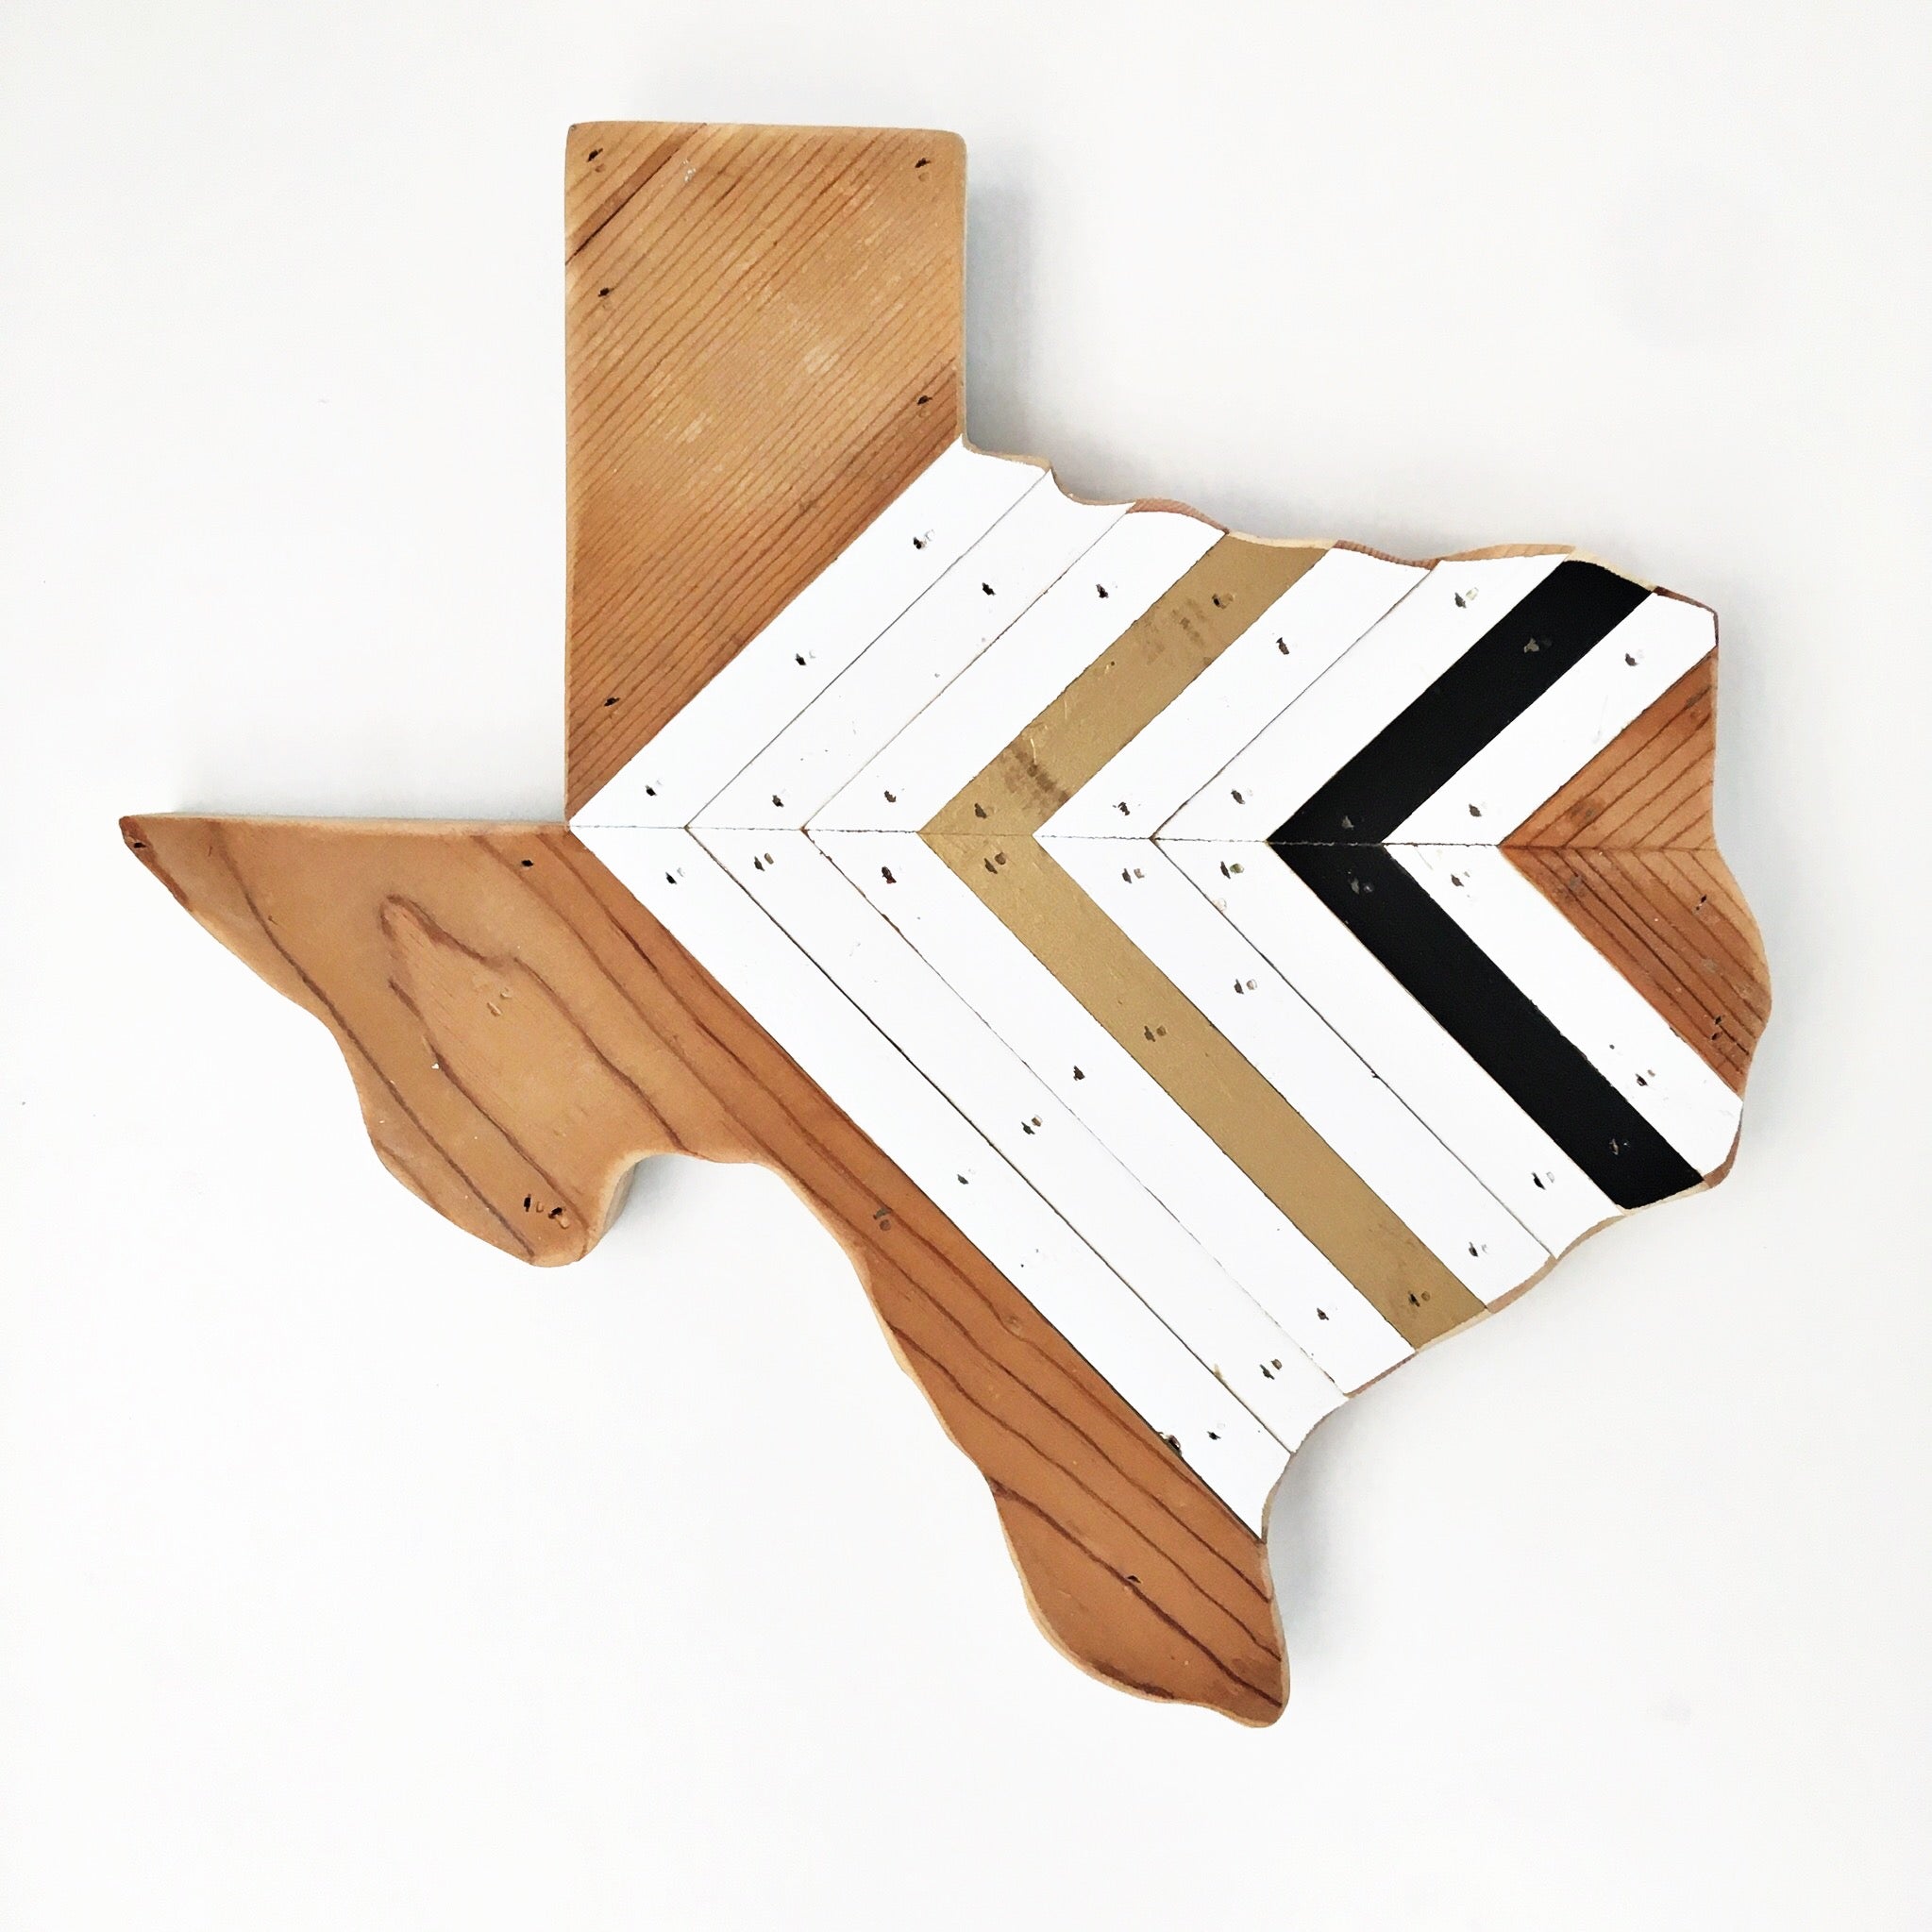 EXCLUSIVE CHEVRON TEXAS - 15" (One-of-a-Kind)